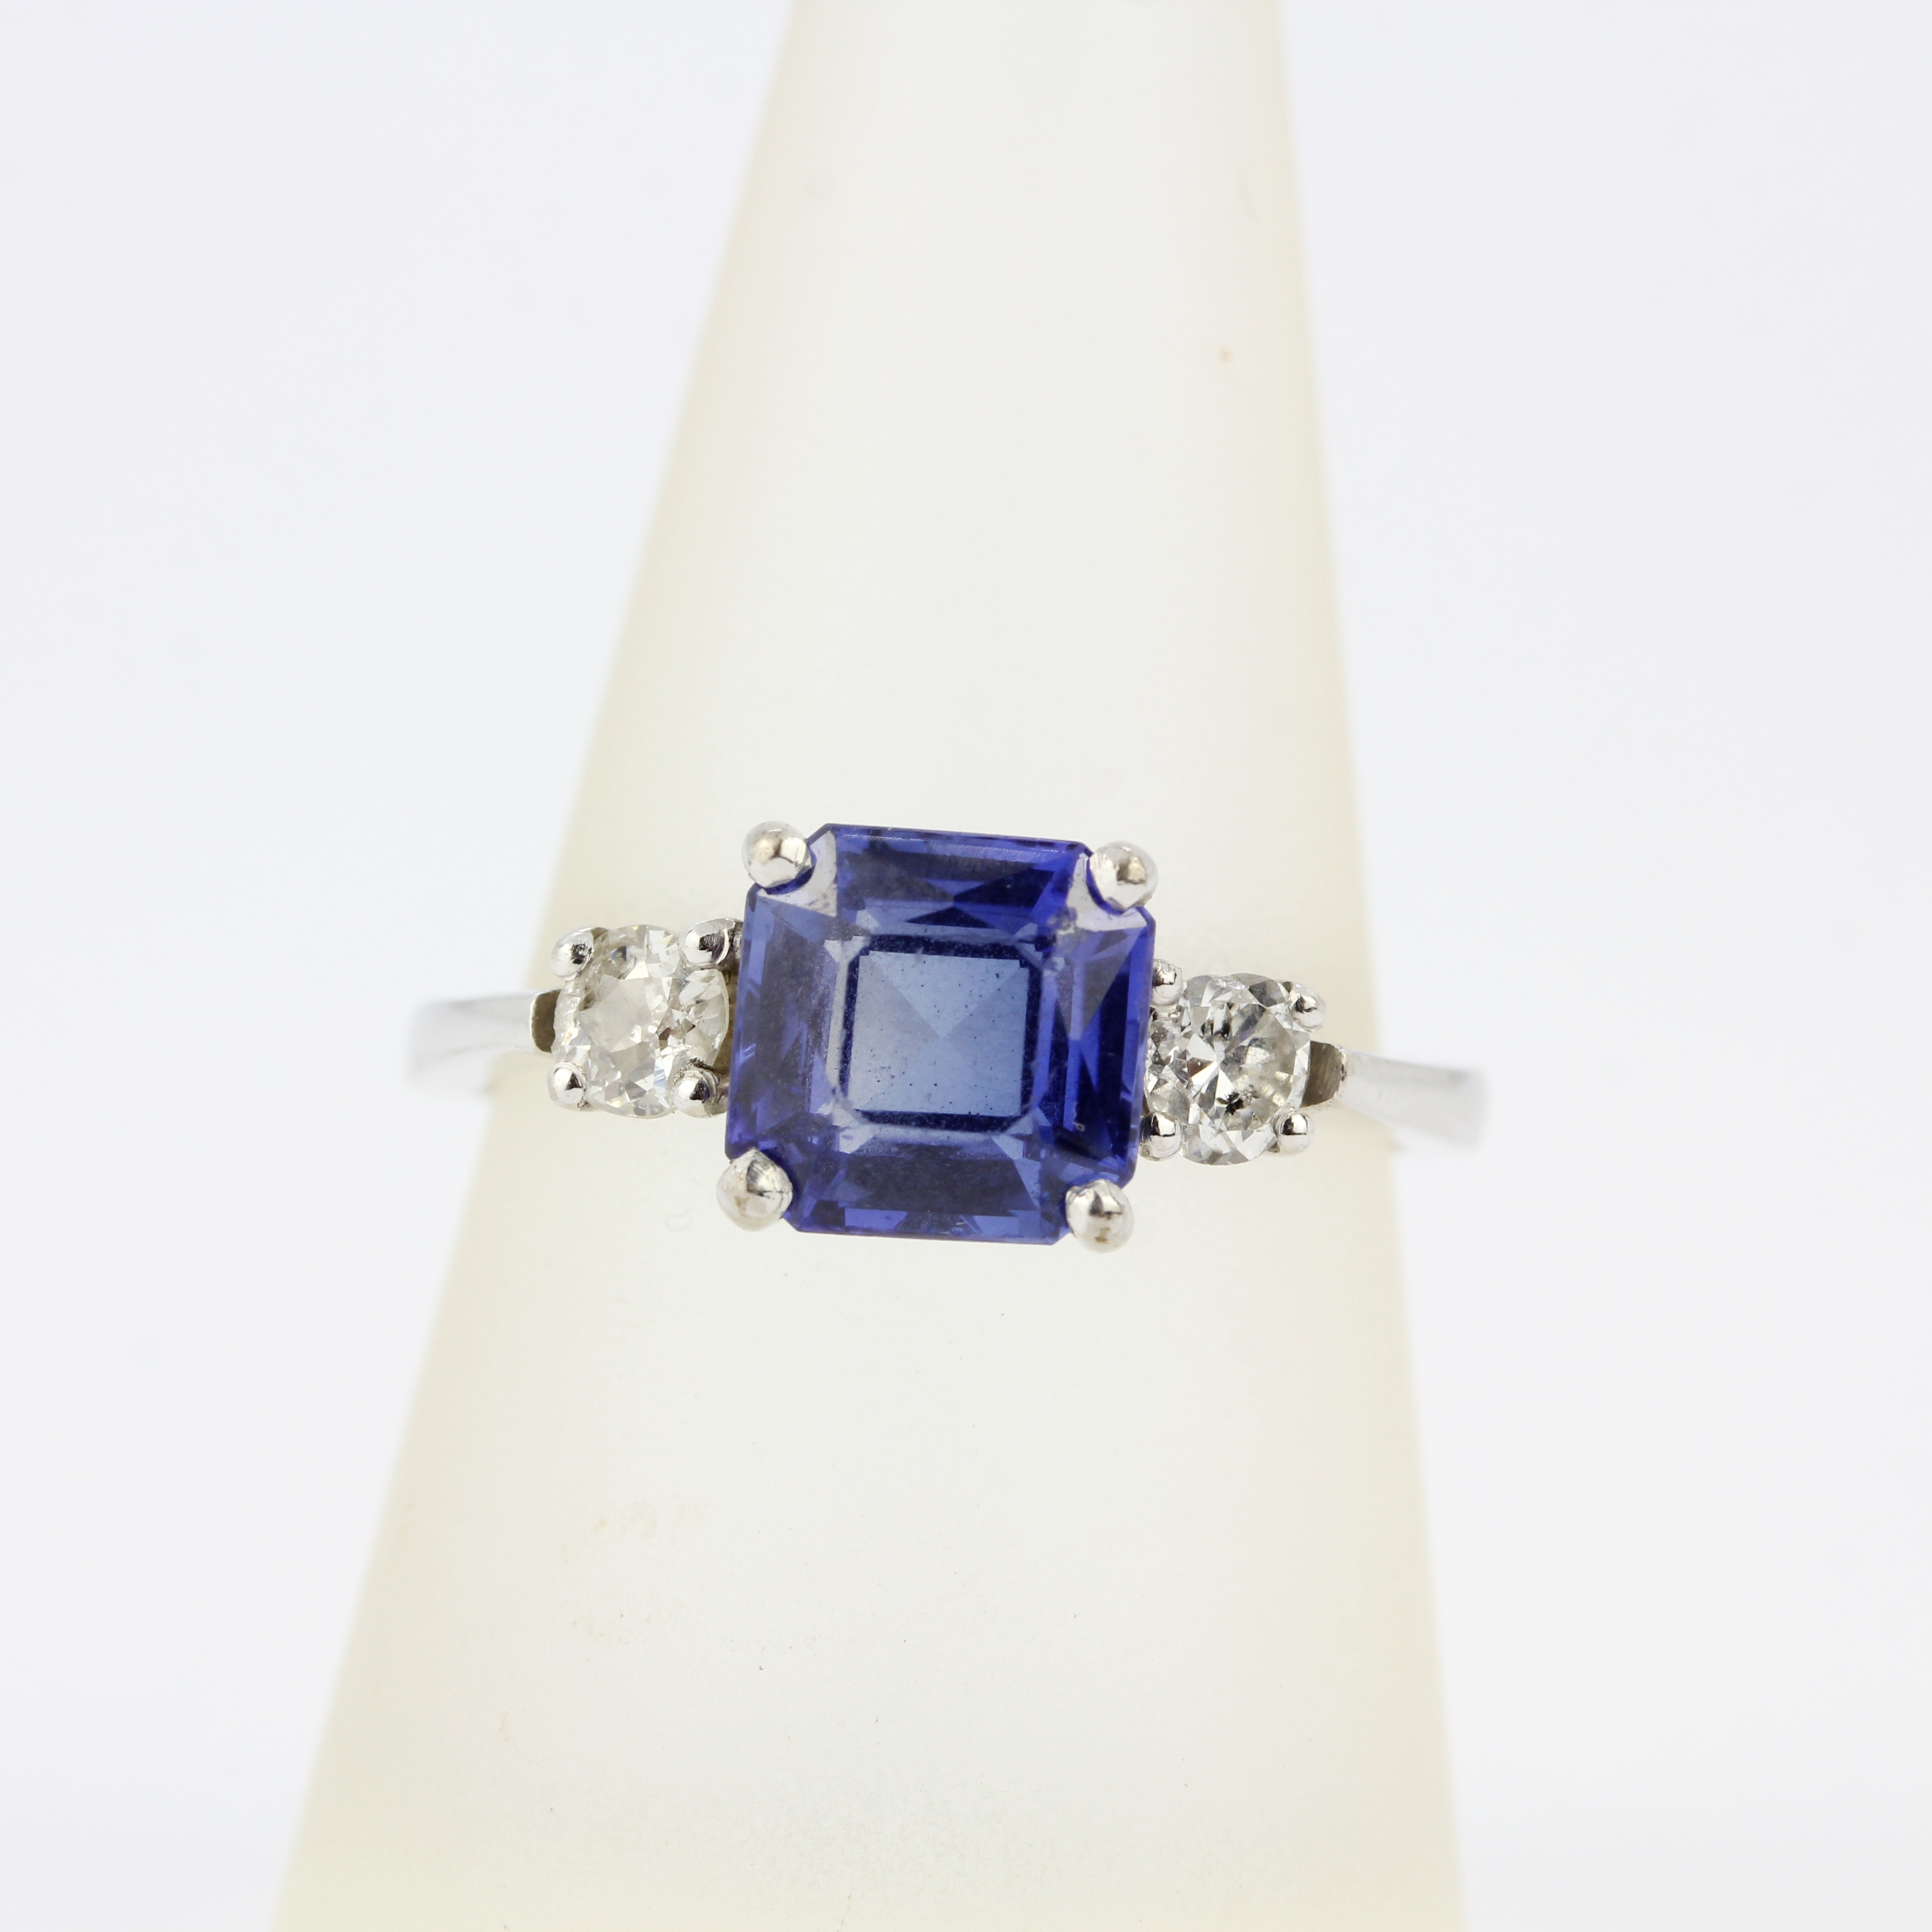 An 18ct white gold ring set with a fancy cut sapphire flanked by brilliant cut diamonds, diamonds